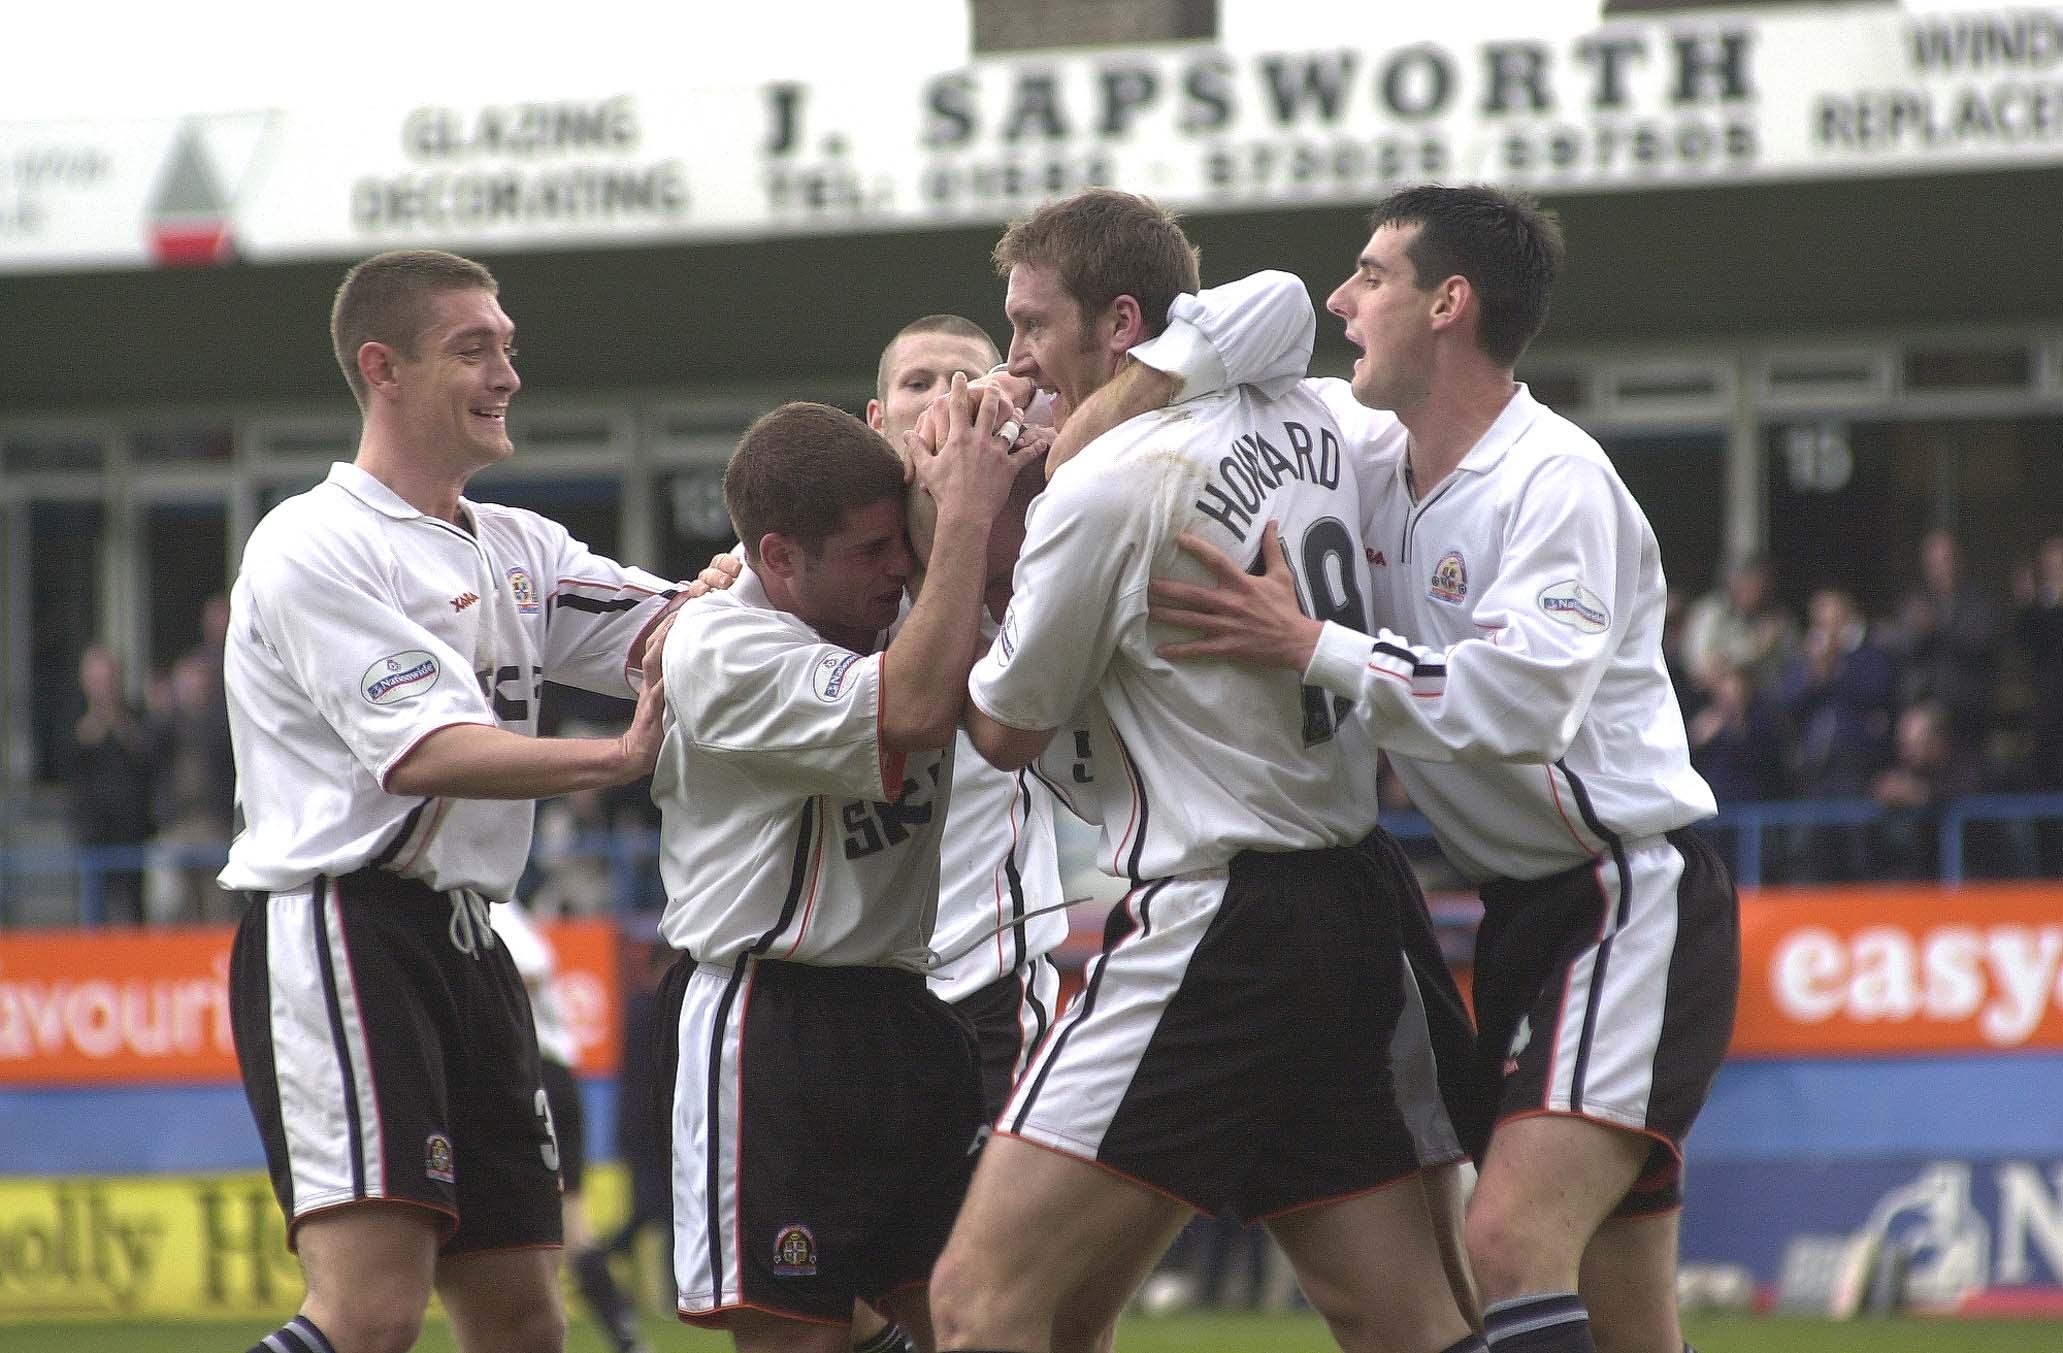 Paul Hughes is mobbed after scoring the only goal of the game